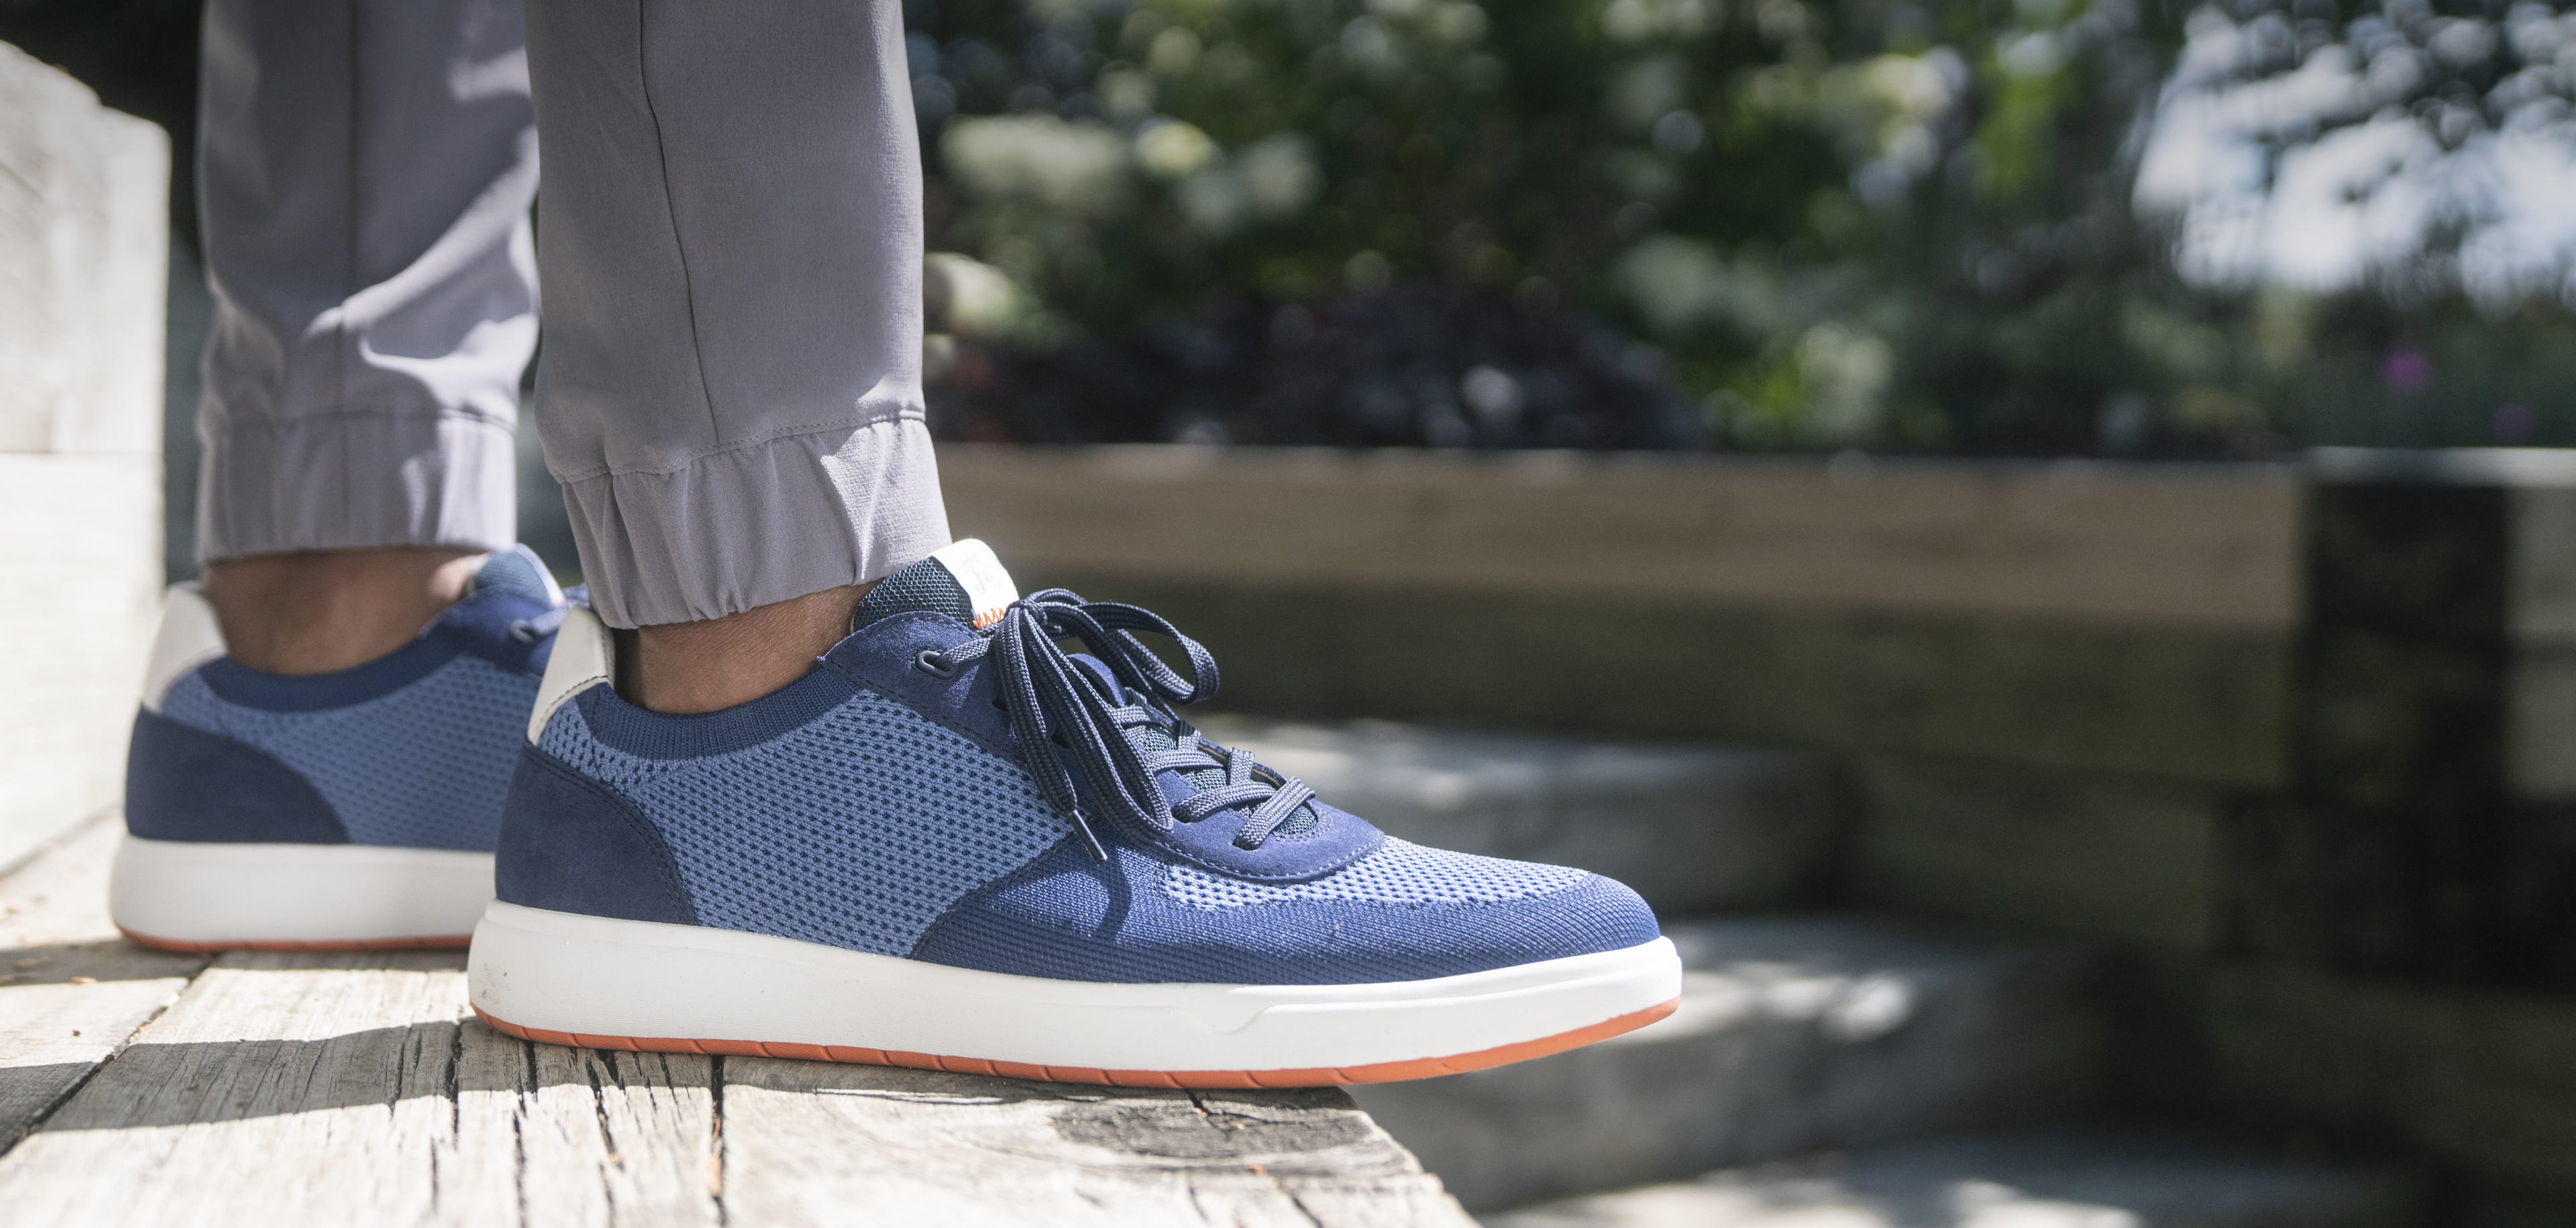 Click to shop Florsheim new arrivals. Image features the Heist 6 eye sneaker in blue.